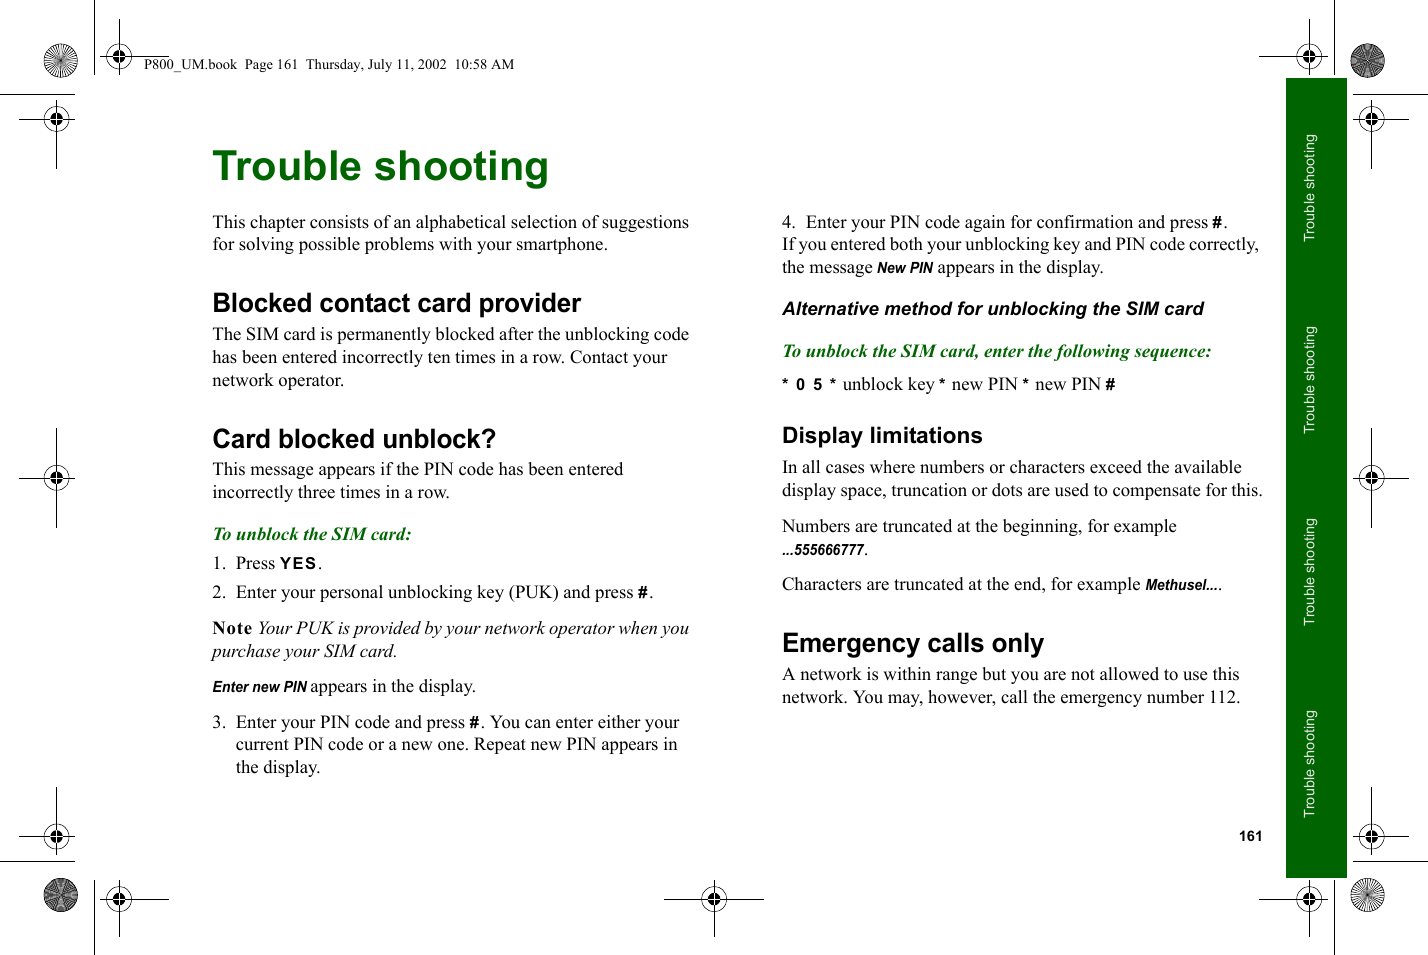 161Trouble shootingTrouble shootingTrouble shootingTrouble shootingTrouble shootingThis chapter consists of an alphabetical selection of suggestions for solving possible problems with your smartphone.Blocked contact card providerThe SIM card is permanently blocked after the unblocking code has been entered incorrectly ten times in a row. Contact your network operator.Card blocked unblock?This message appears if the PIN code has been entered incorrectly three times in a row.To unblock the SIM card:1. Press YES.2. Enter your personal unblocking key (PUK) and press #. Note Your PUK is provided by your network operator when you purchase your SIM card.Enter new PIN appears in the display.3. Enter your PIN code and press #. You can enter either your current PIN code or a new one. Repeat new PIN appears in the display.4. Enter your PIN code again for confirmation and press #.If you entered both your unblocking key and PIN code correctly, the message New PIN appears in the display.Alternative method for unblocking the SIM cardTo unblock the SIM card, enter the following sequence:* 0 5 * unblock key * new PIN * new PIN #Display limitationsIn all cases where numbers or characters exceed the available display space, truncation or dots are used to compensate for this.Numbers are truncated at the beginning, for example ...555666777.Characters are truncated at the end, for example Methusel....Emergency calls onlyA network is within range but you are not allowed to use this network. You may, however, call the emergency number 112.P800_UM.book  Page 161  Thursday, July 11, 2002  10:58 AM